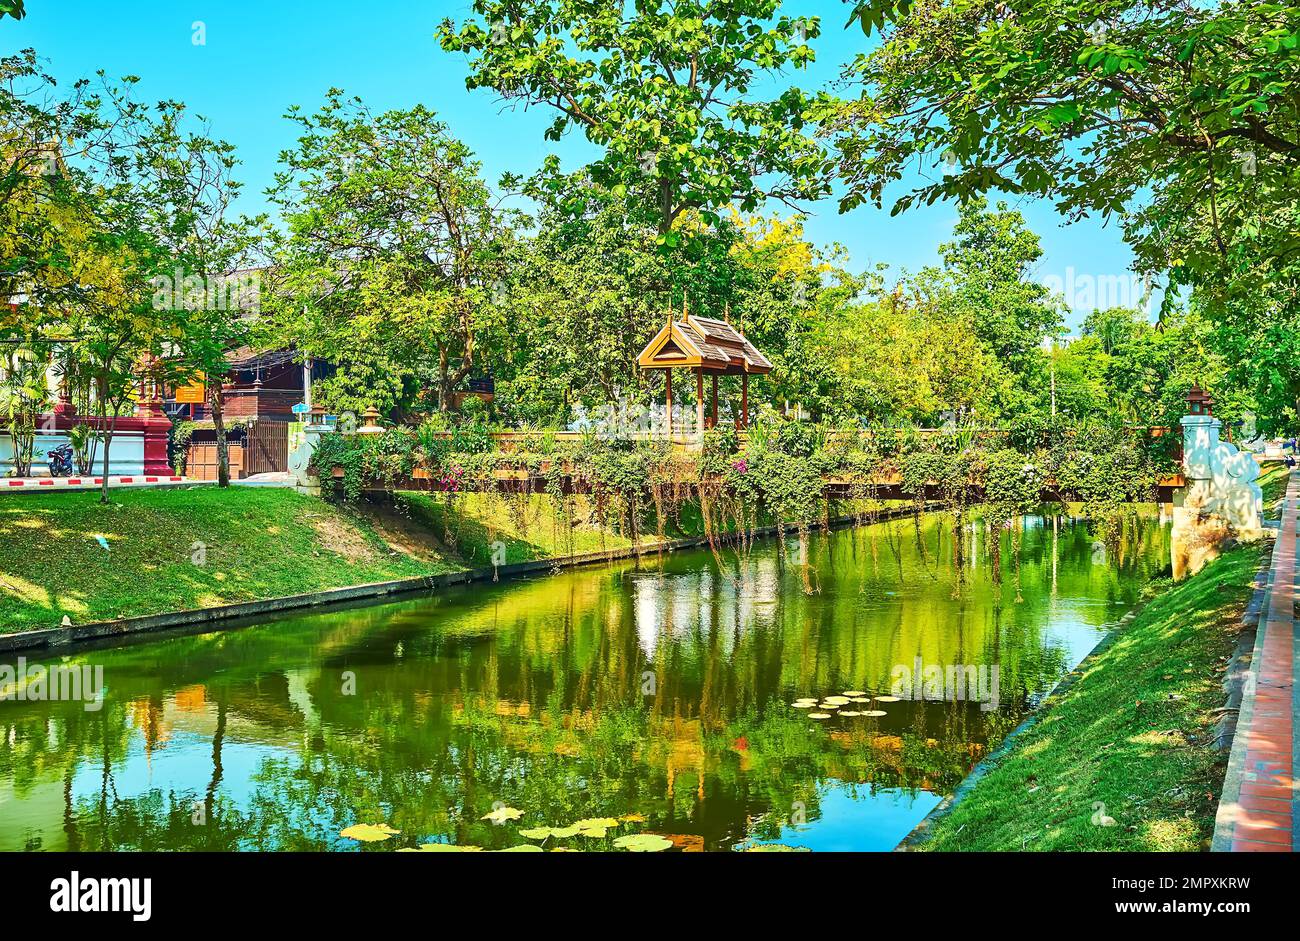 Walk along the medieval moat with niice small footbridges, decorated with wooden gate and hanging plants, Chiang Mai, Thailand Stock Photo